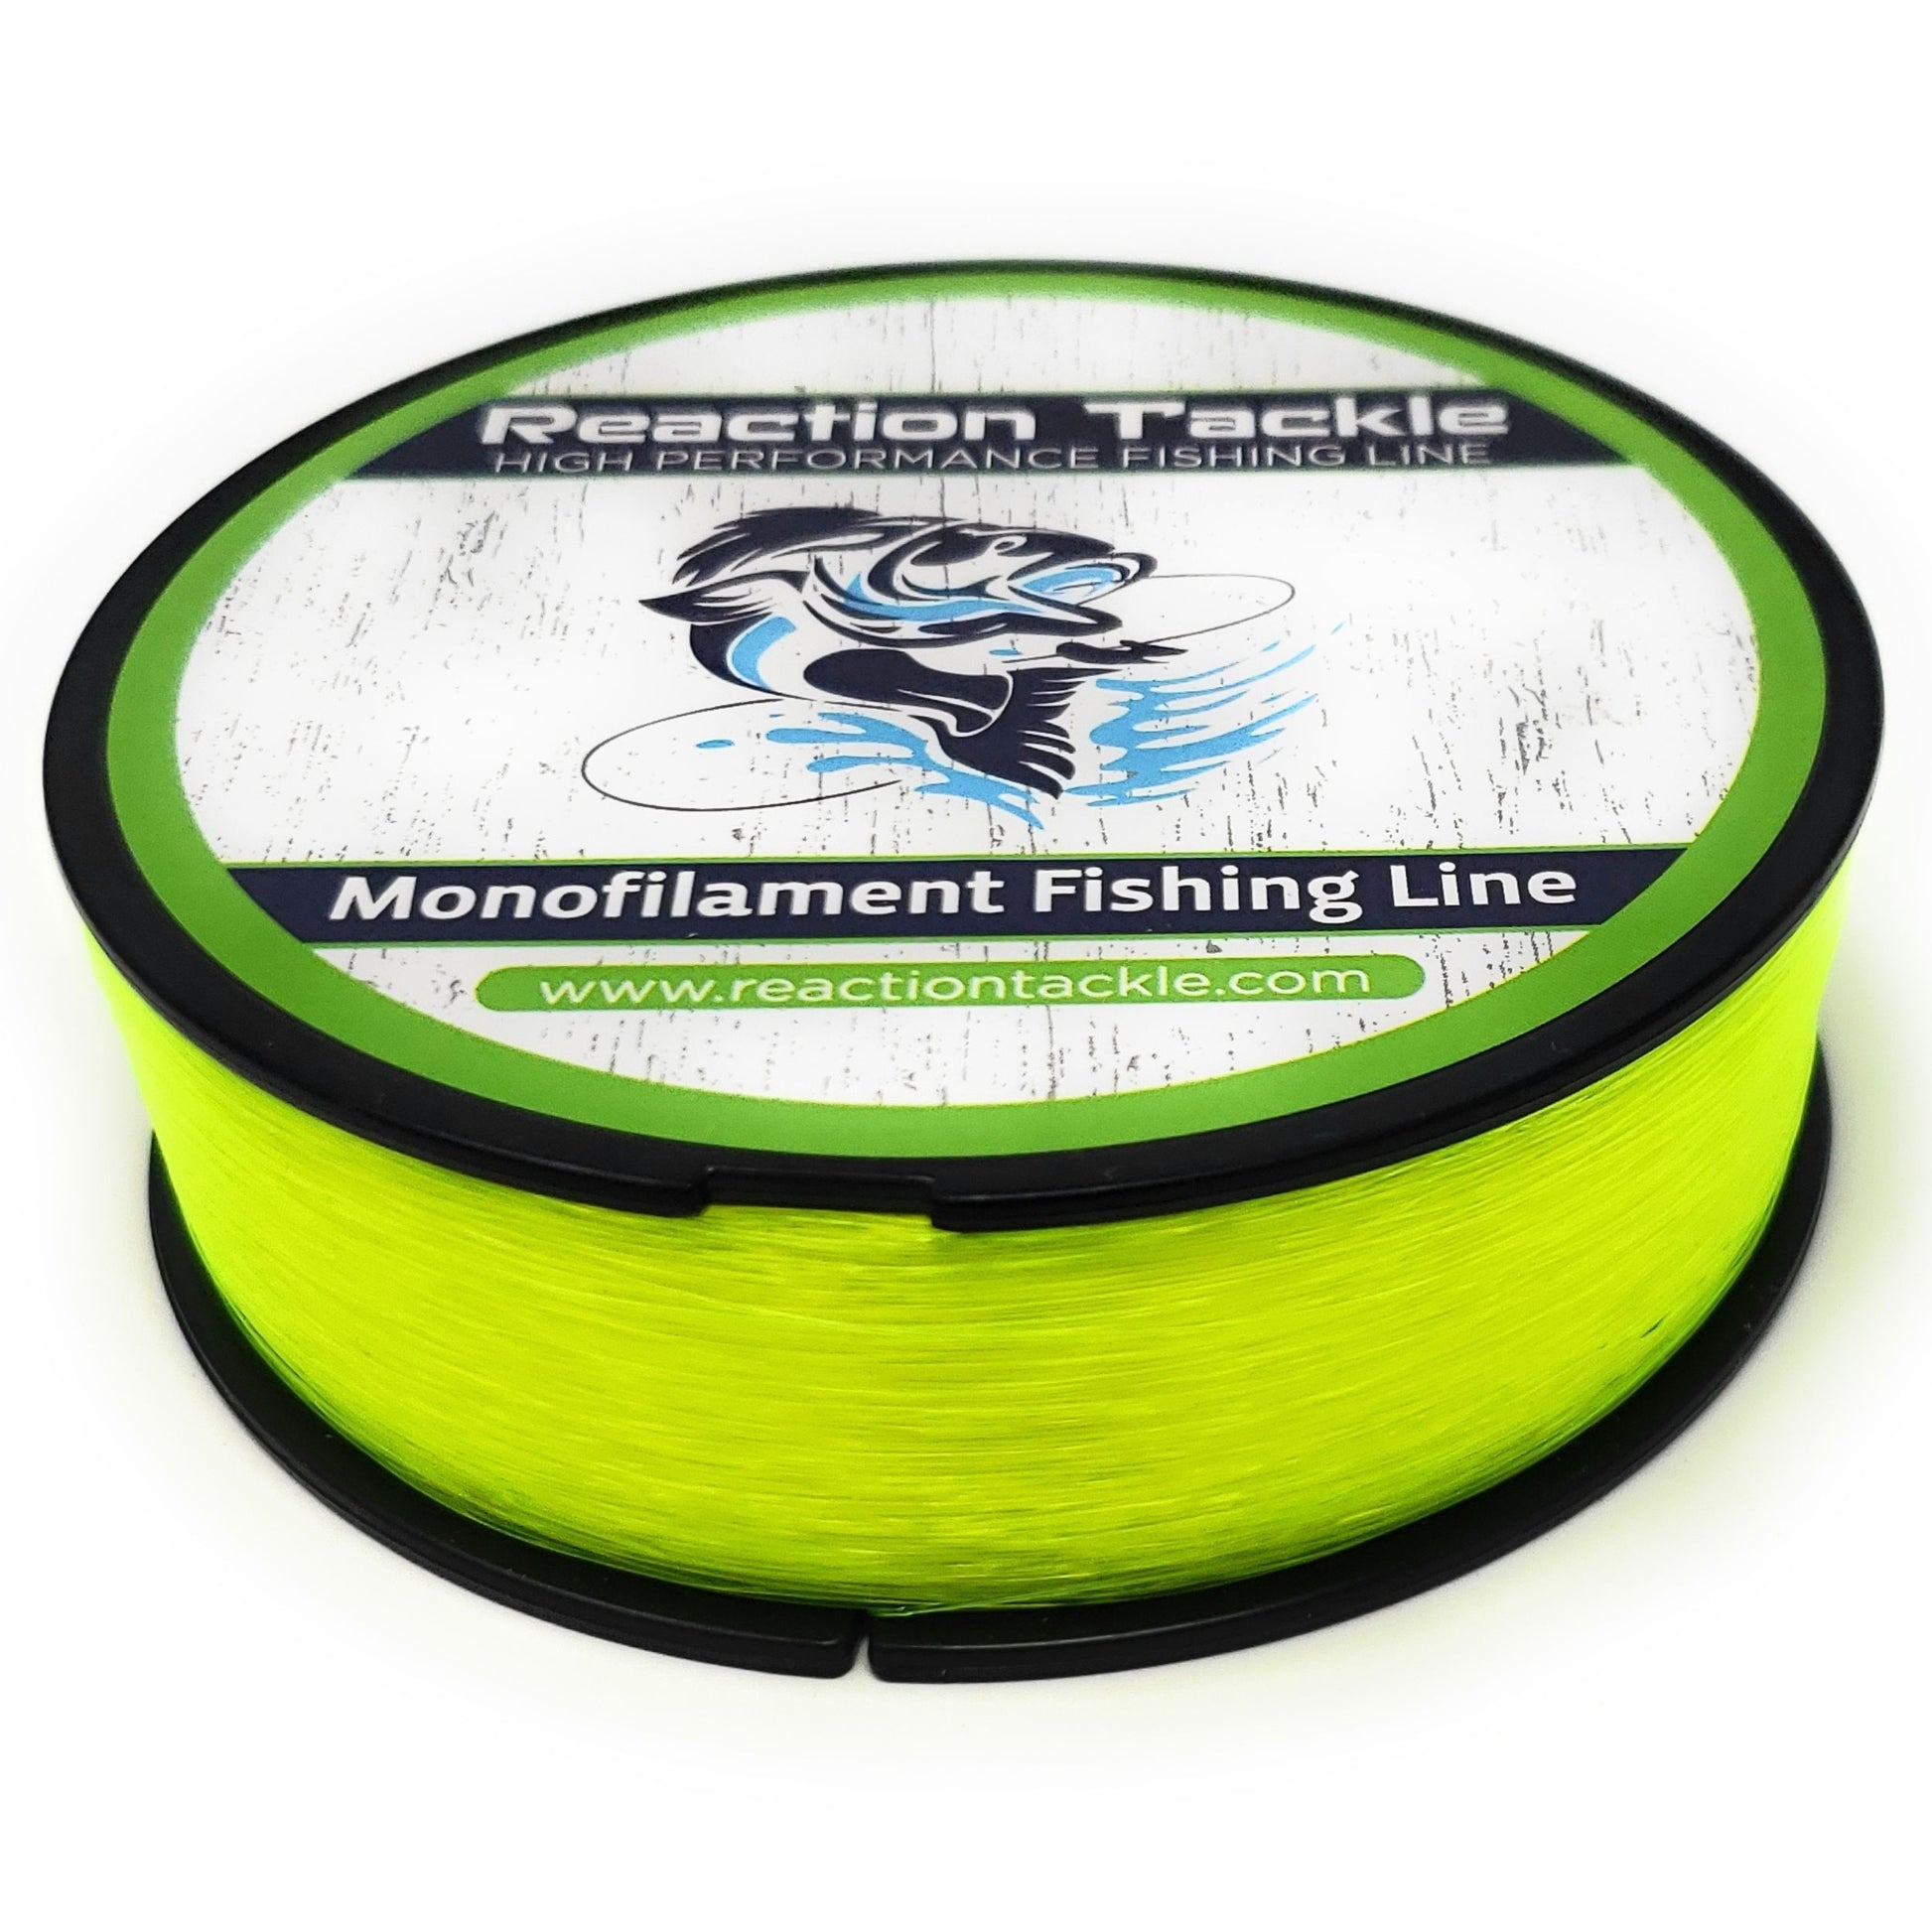 25lb. Fishing Line in Monofilament Fishing Line for sale